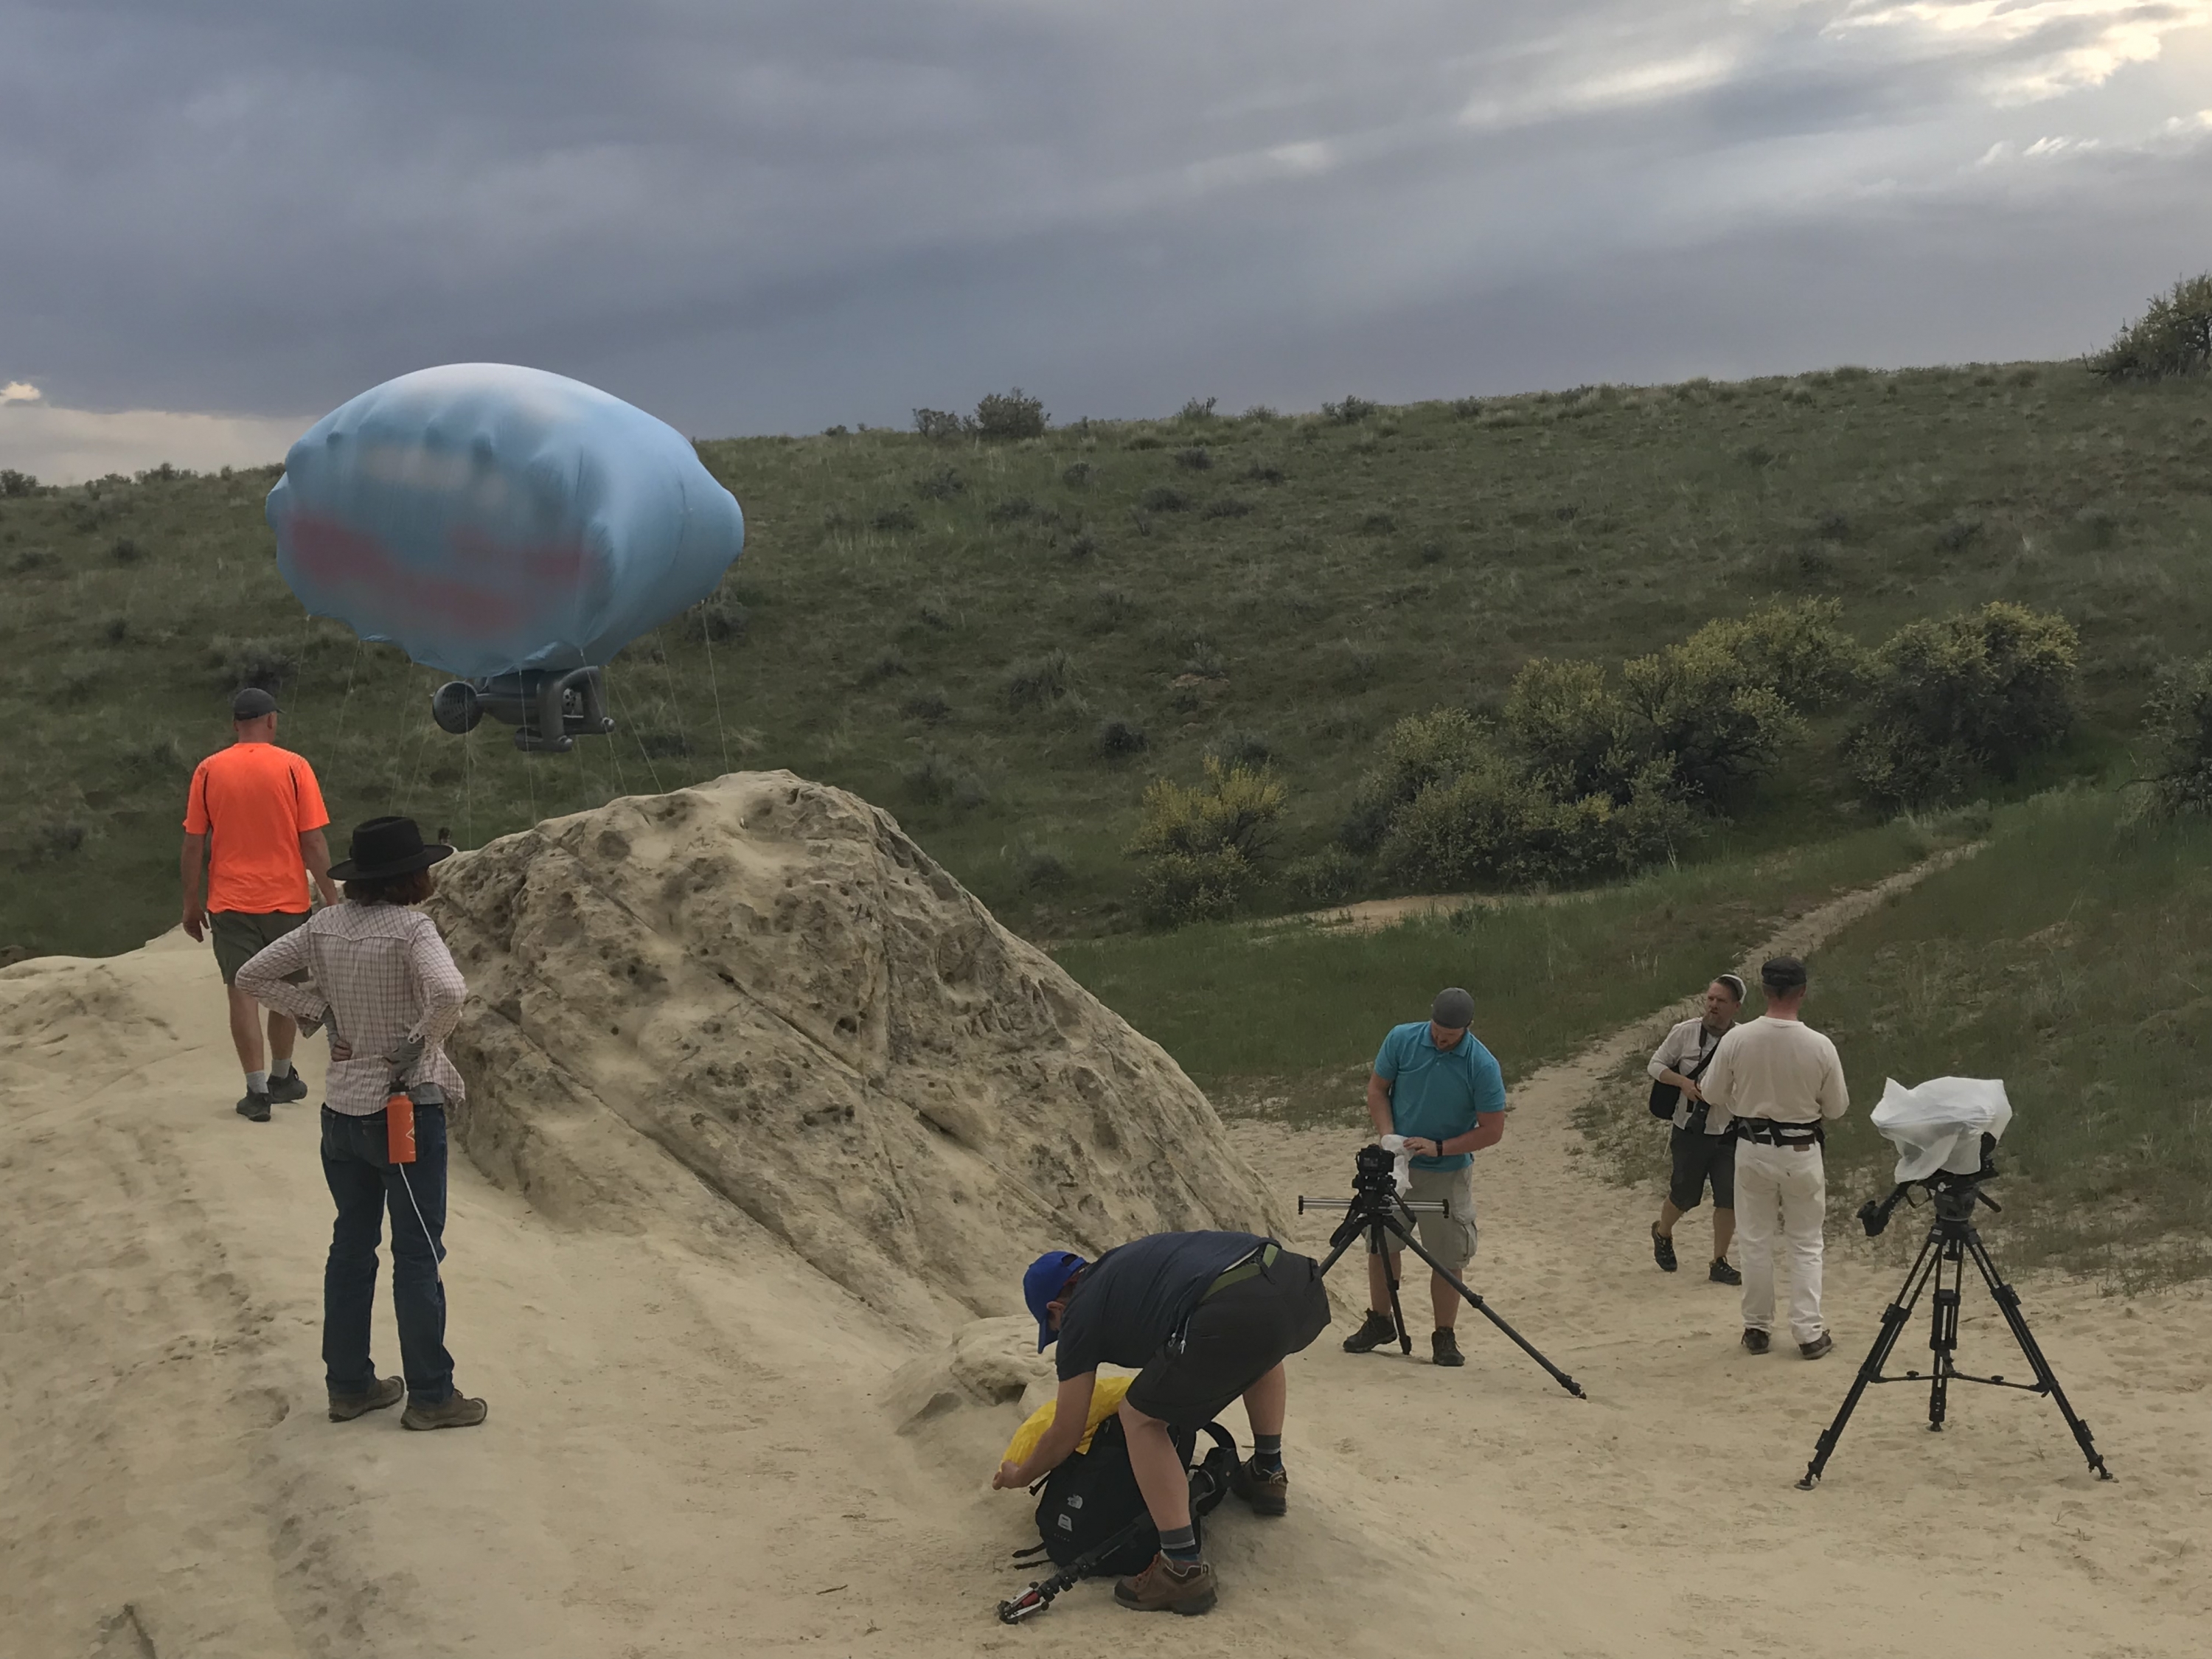 Camera crew setting up around Cloudship performance art in the Boise foothills